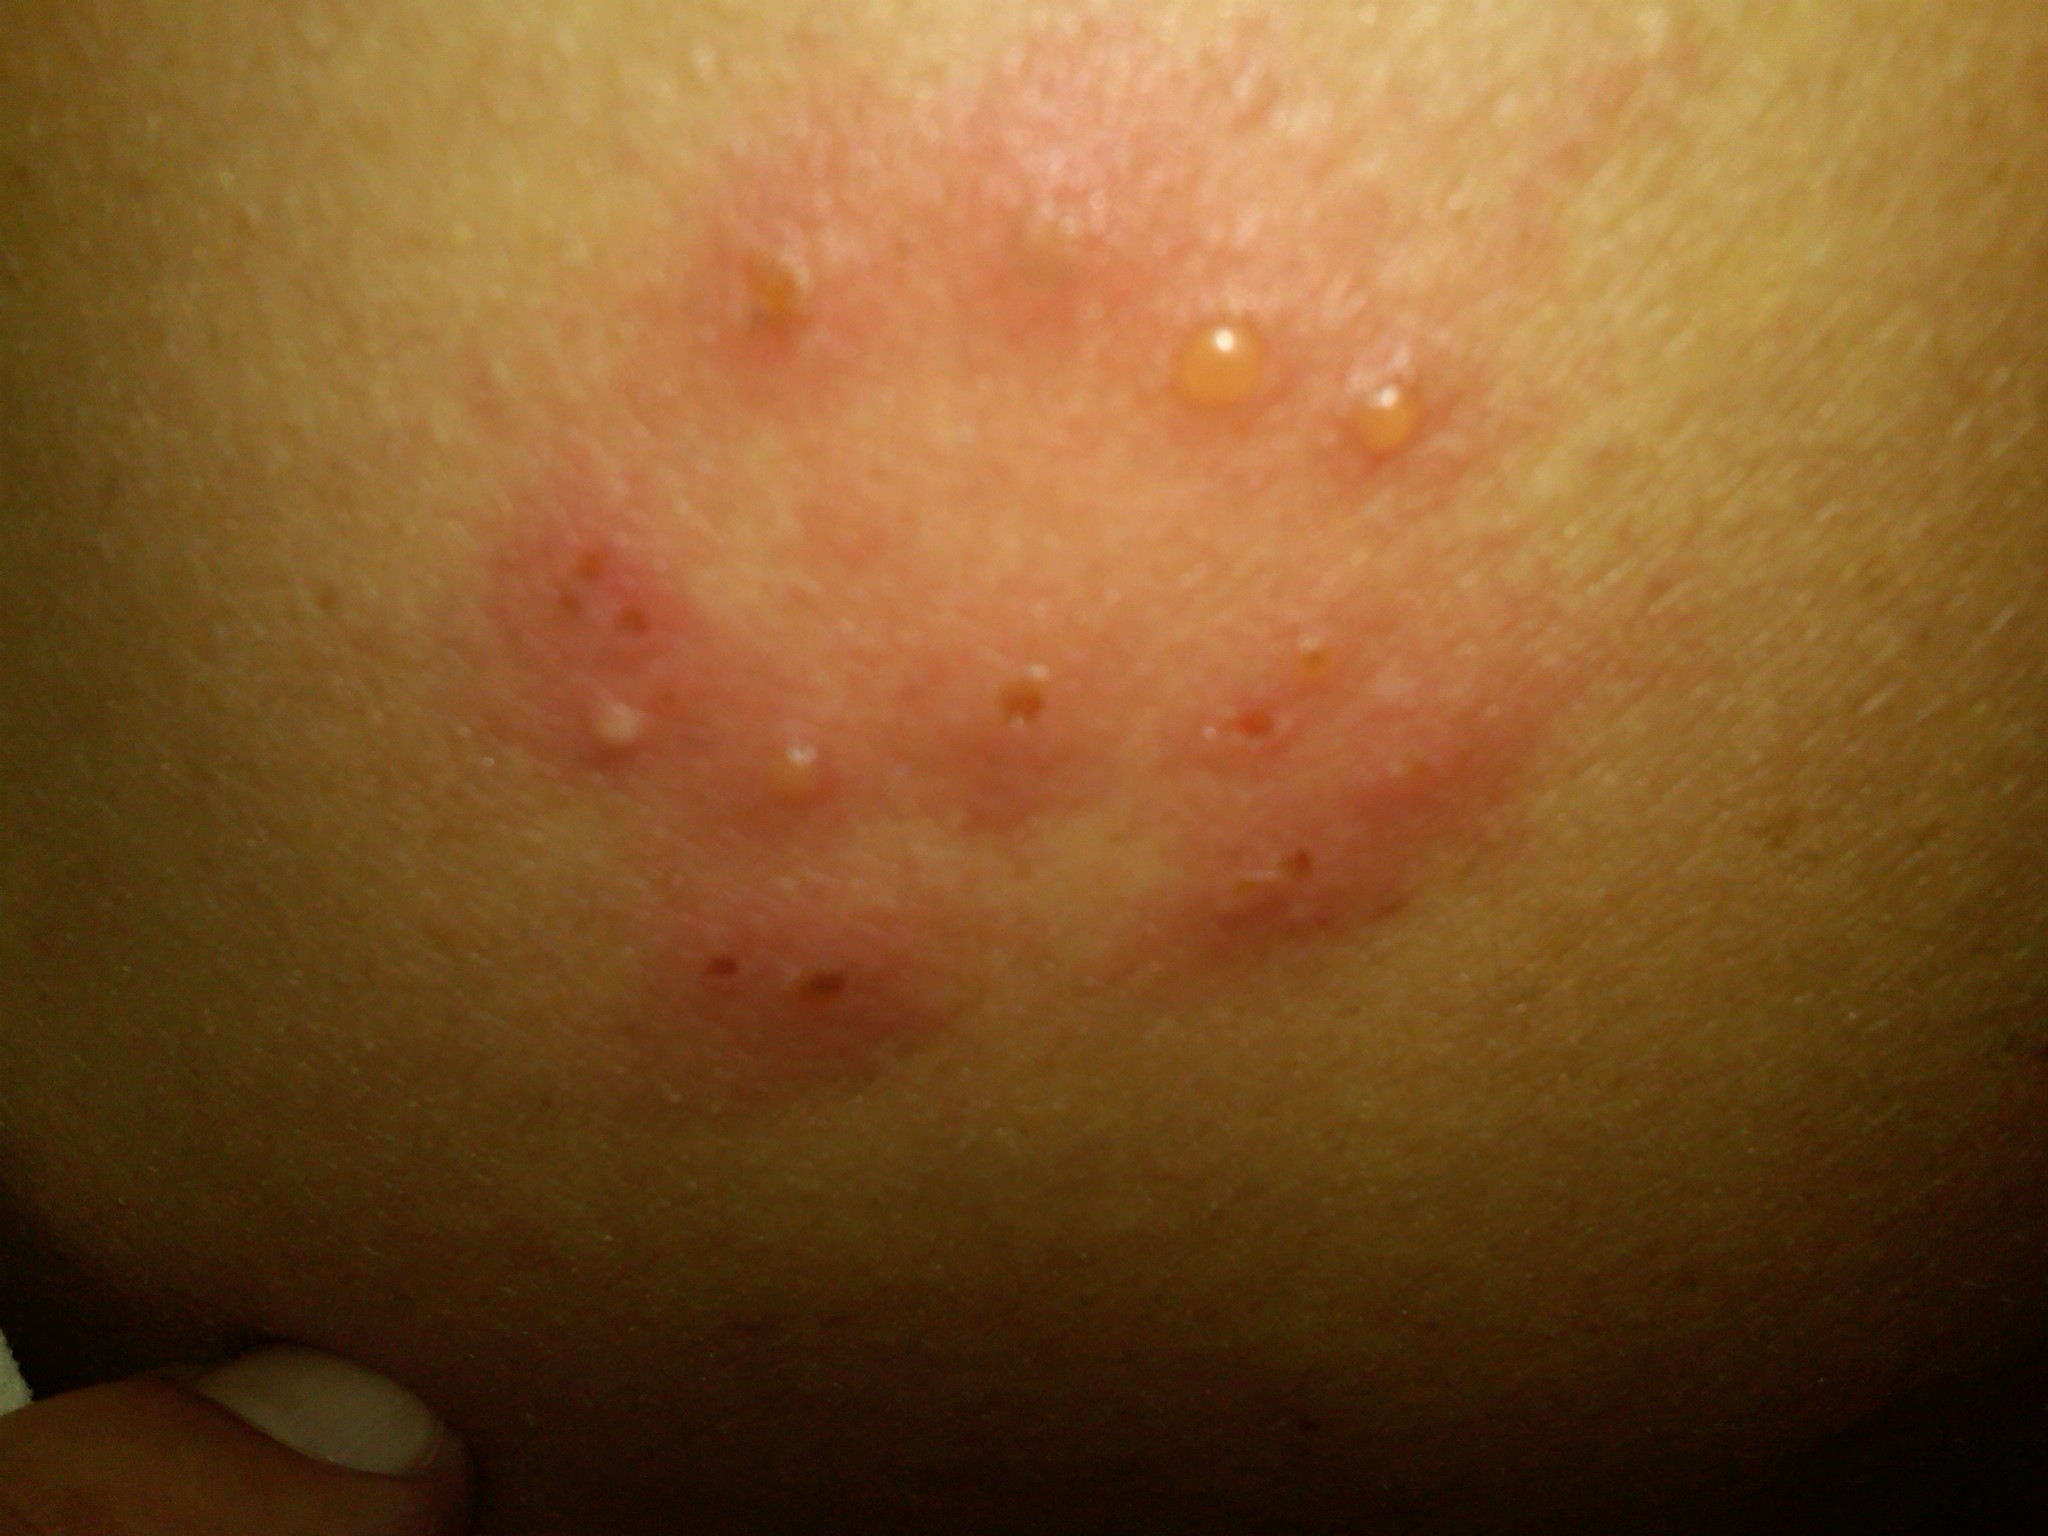 i think i have shingles. i took a phot, can i email it to